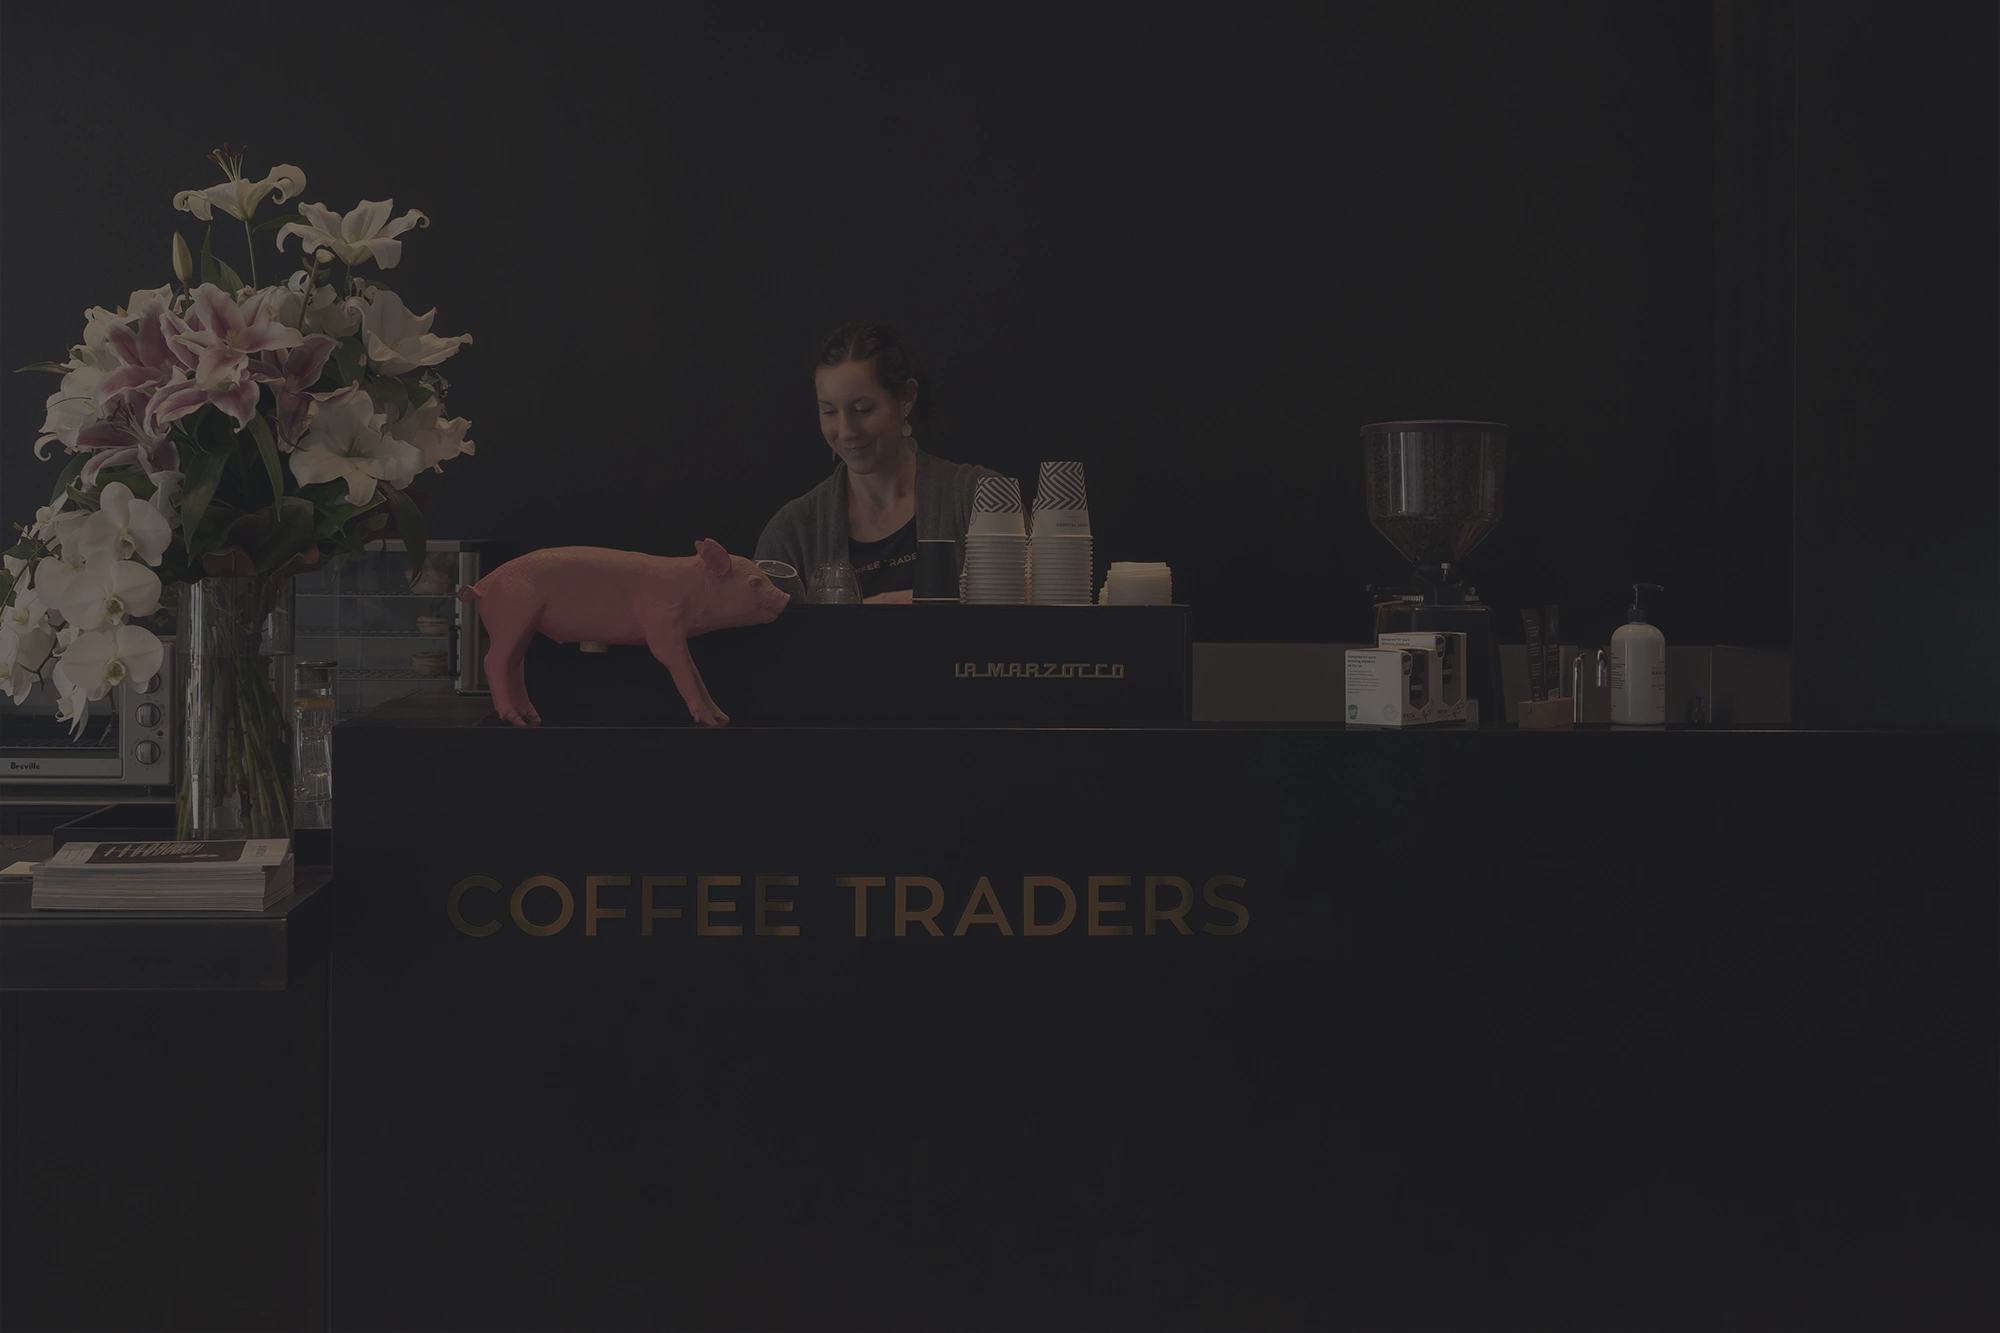 Coffee Traders, Christchurch, New Zealand